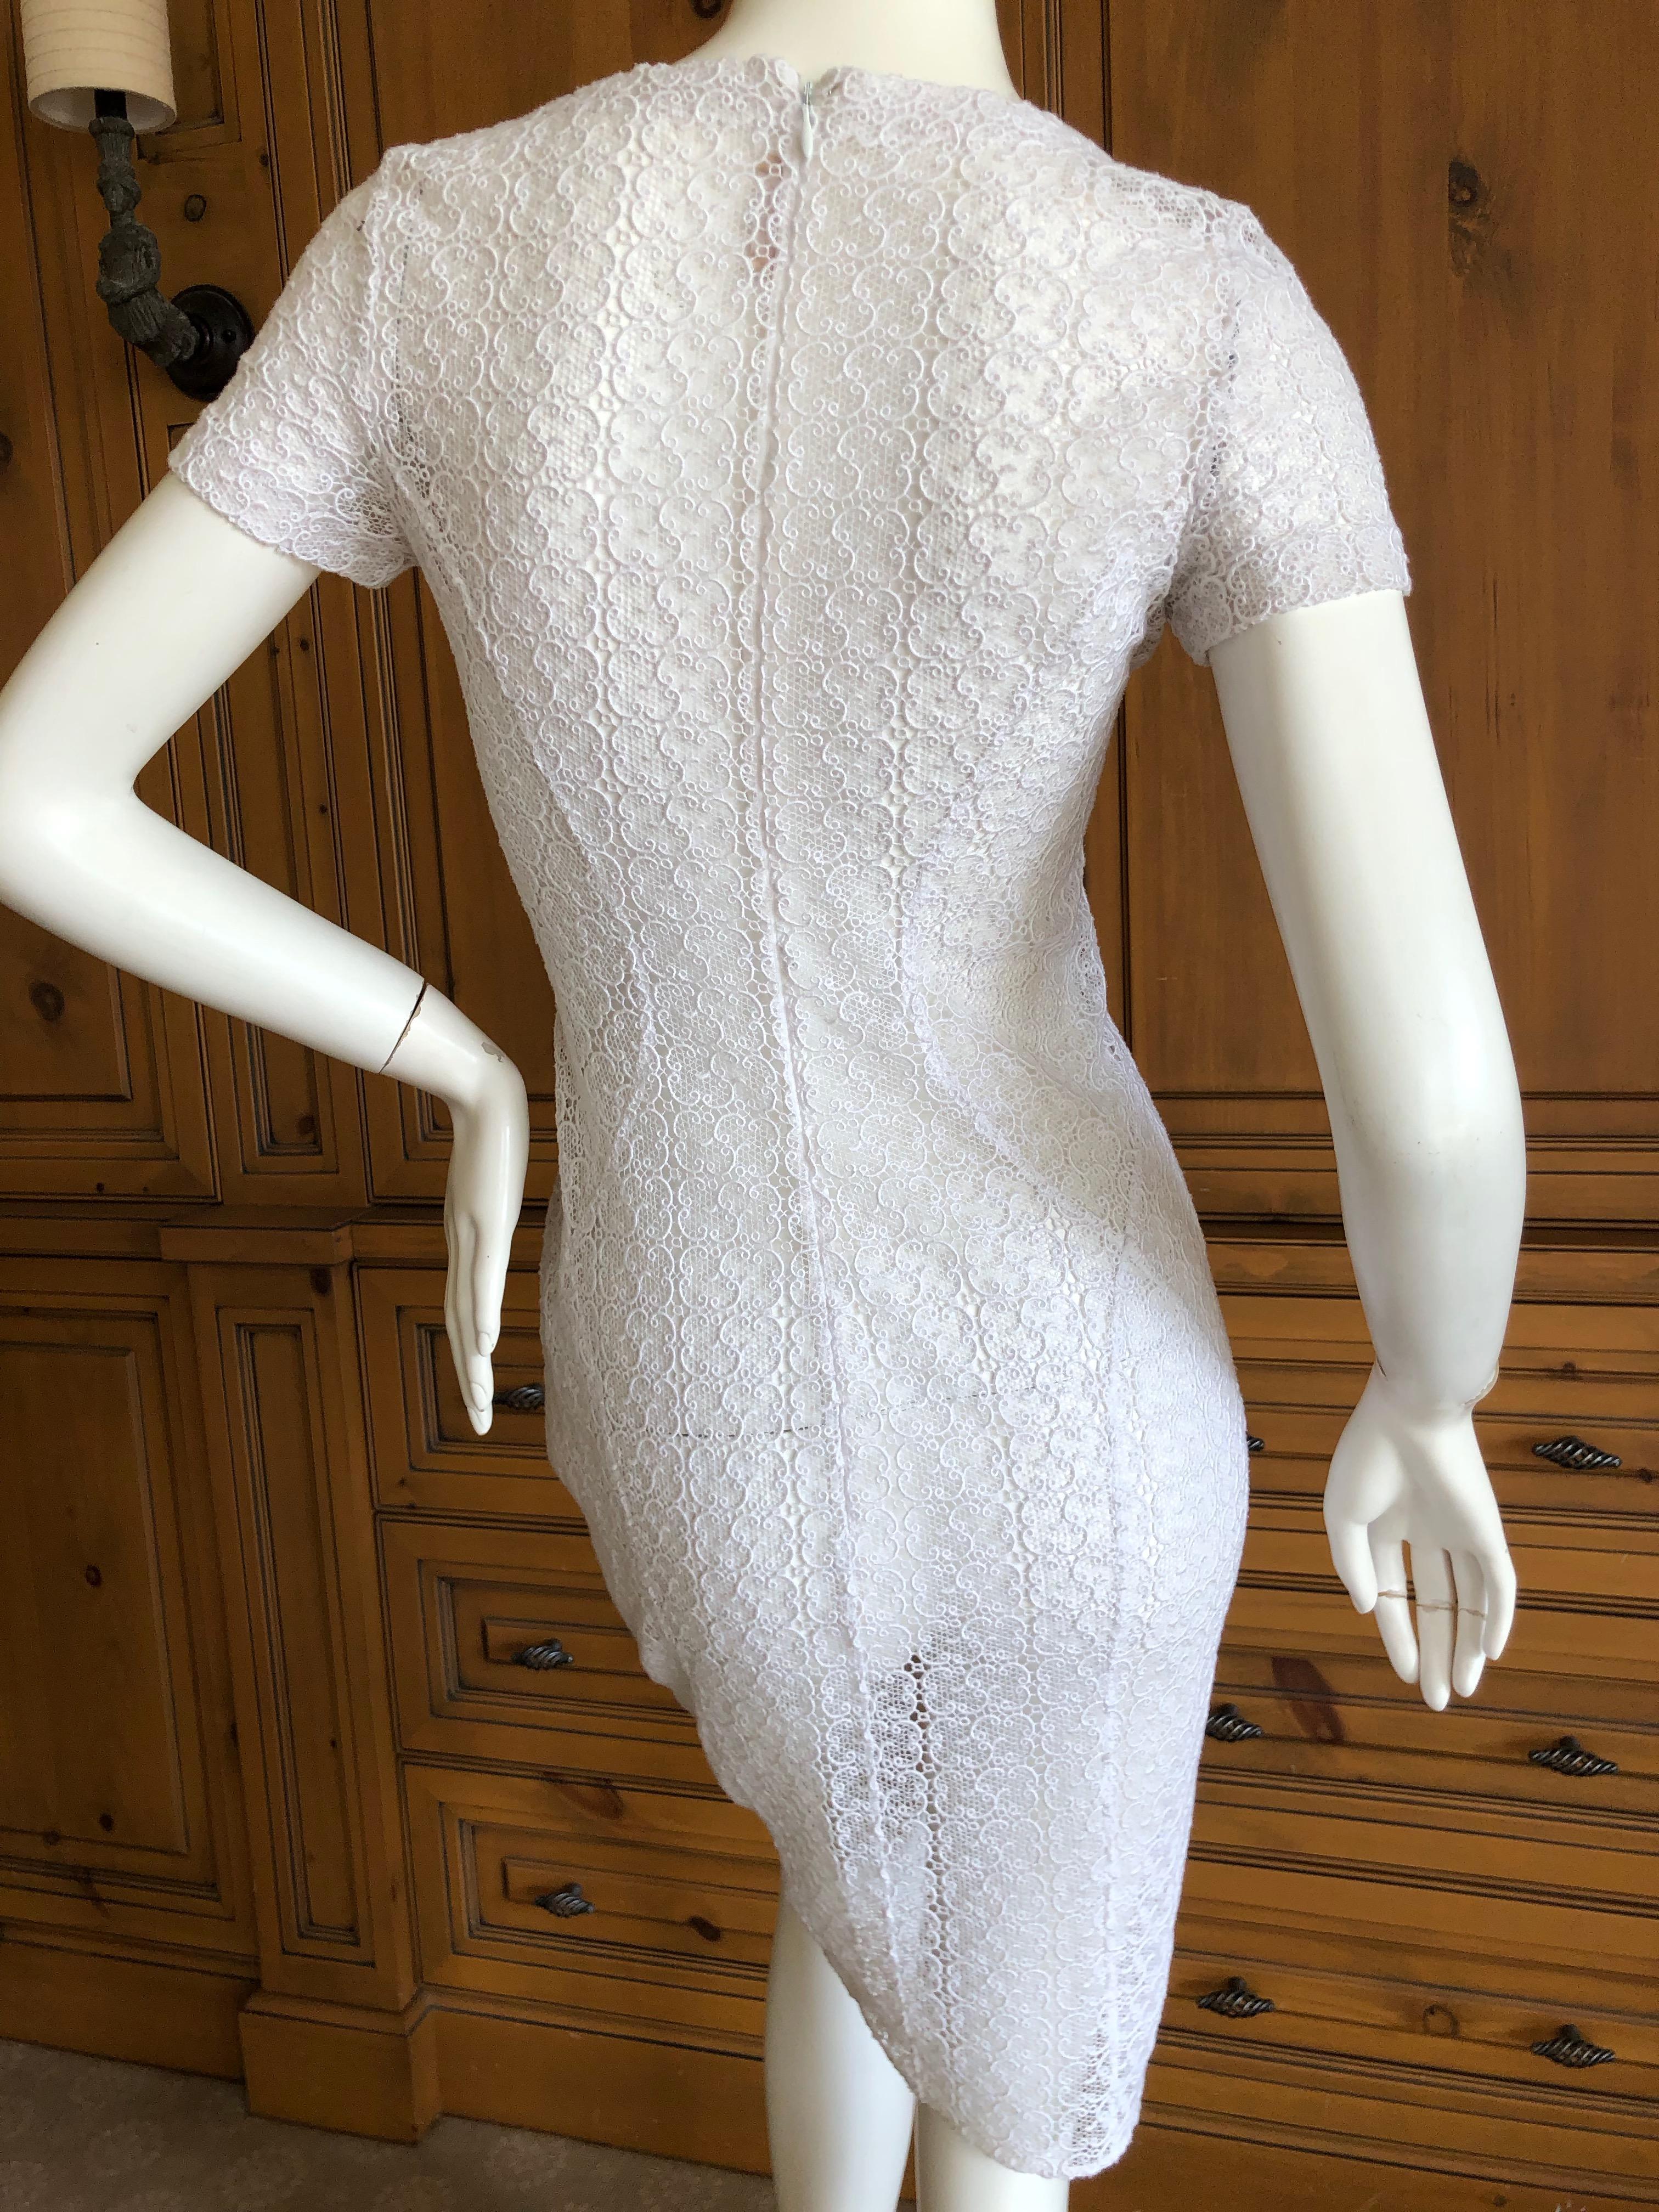 Azzedine Alaia Vintage White Guipure Lace Cap Sleeve Mini Dress.
This is so much prettier than the photos show, the seaming is pure ALAIA
Size S (no size tag)
Bust 32